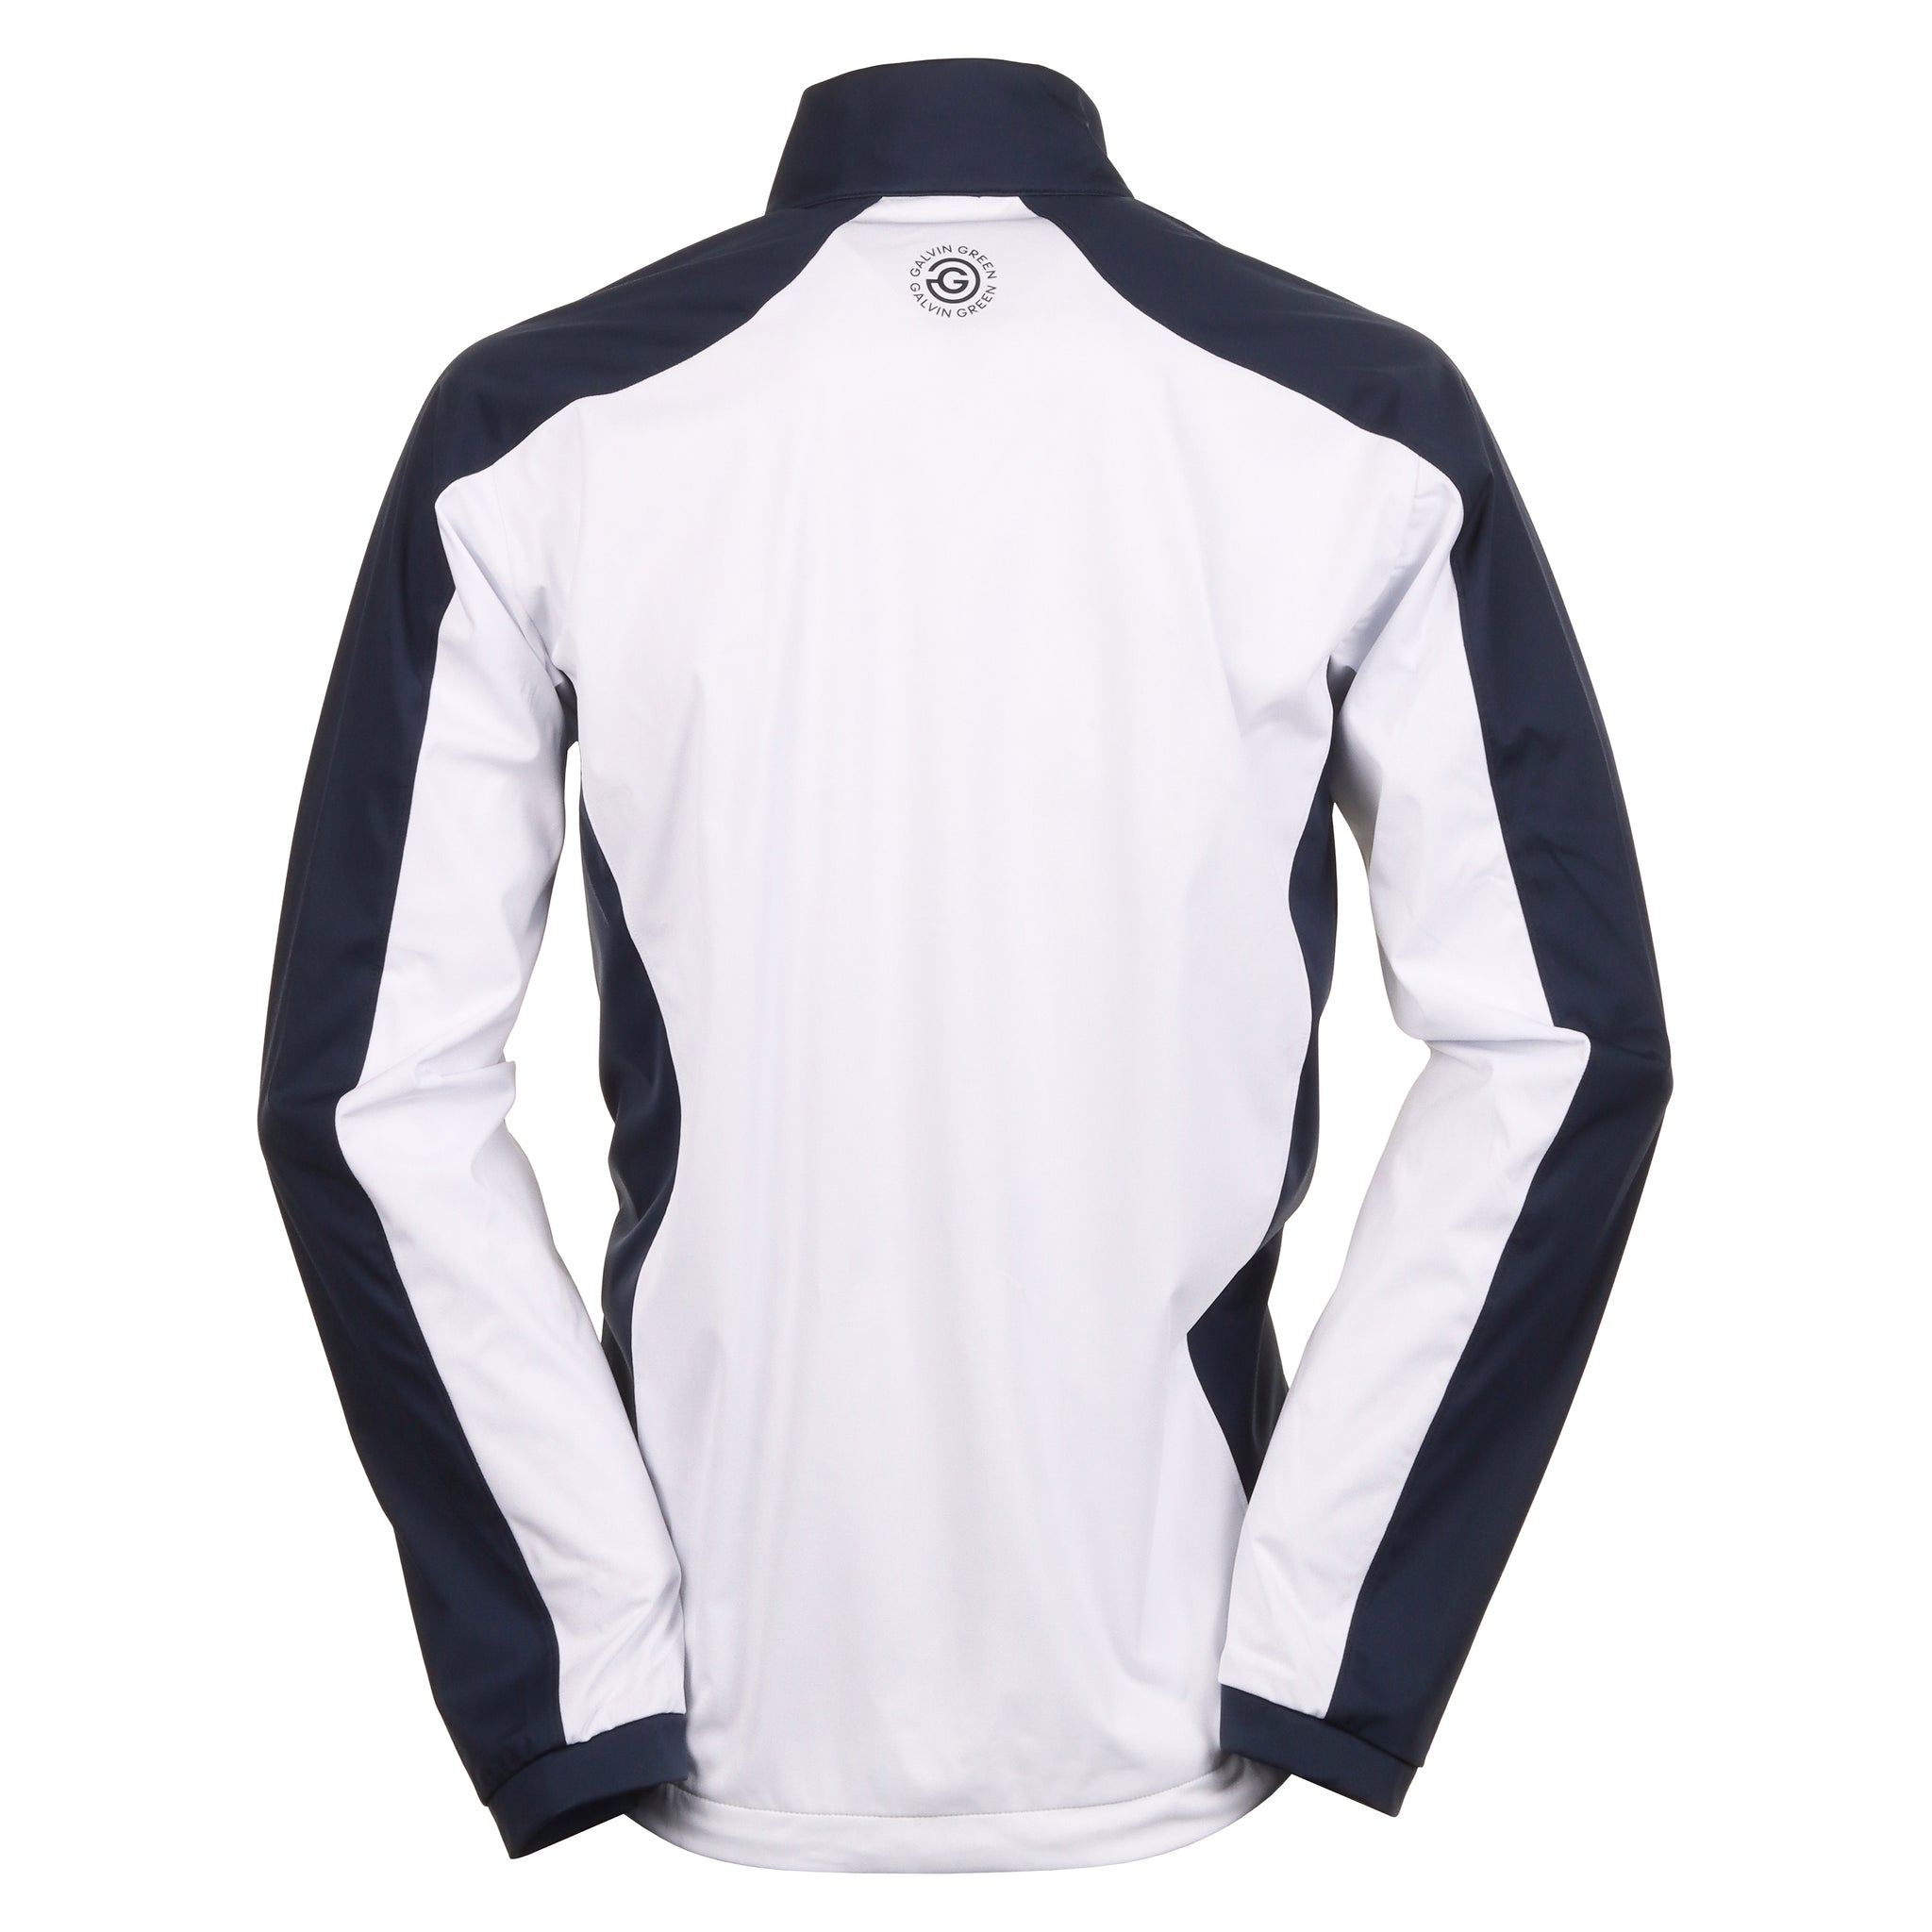 galvin-green-lawrence-interface-1-golf-jacket-white-navy-9996